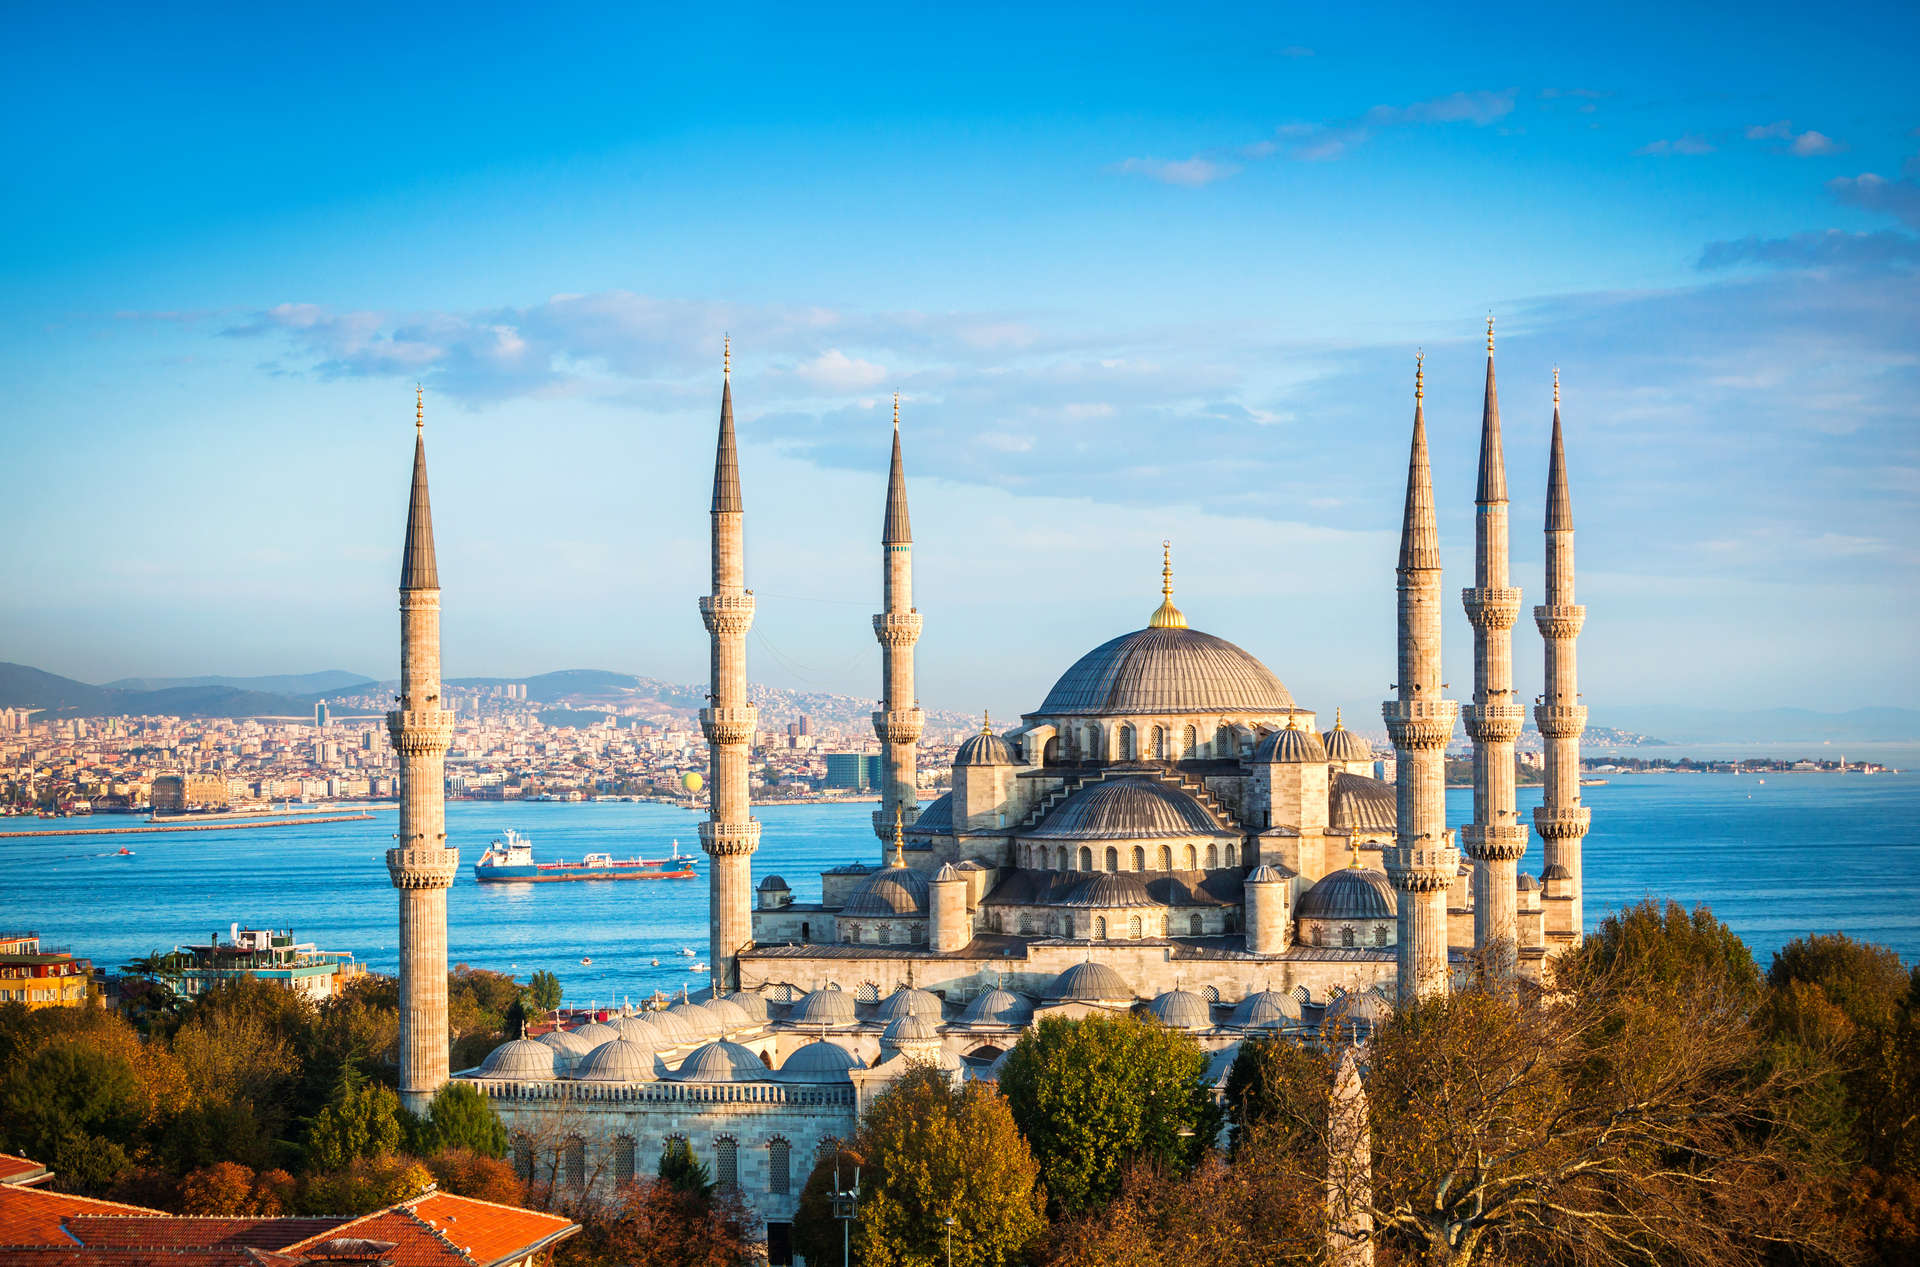 The Blue Mosque is located in Istanbul, Turkey